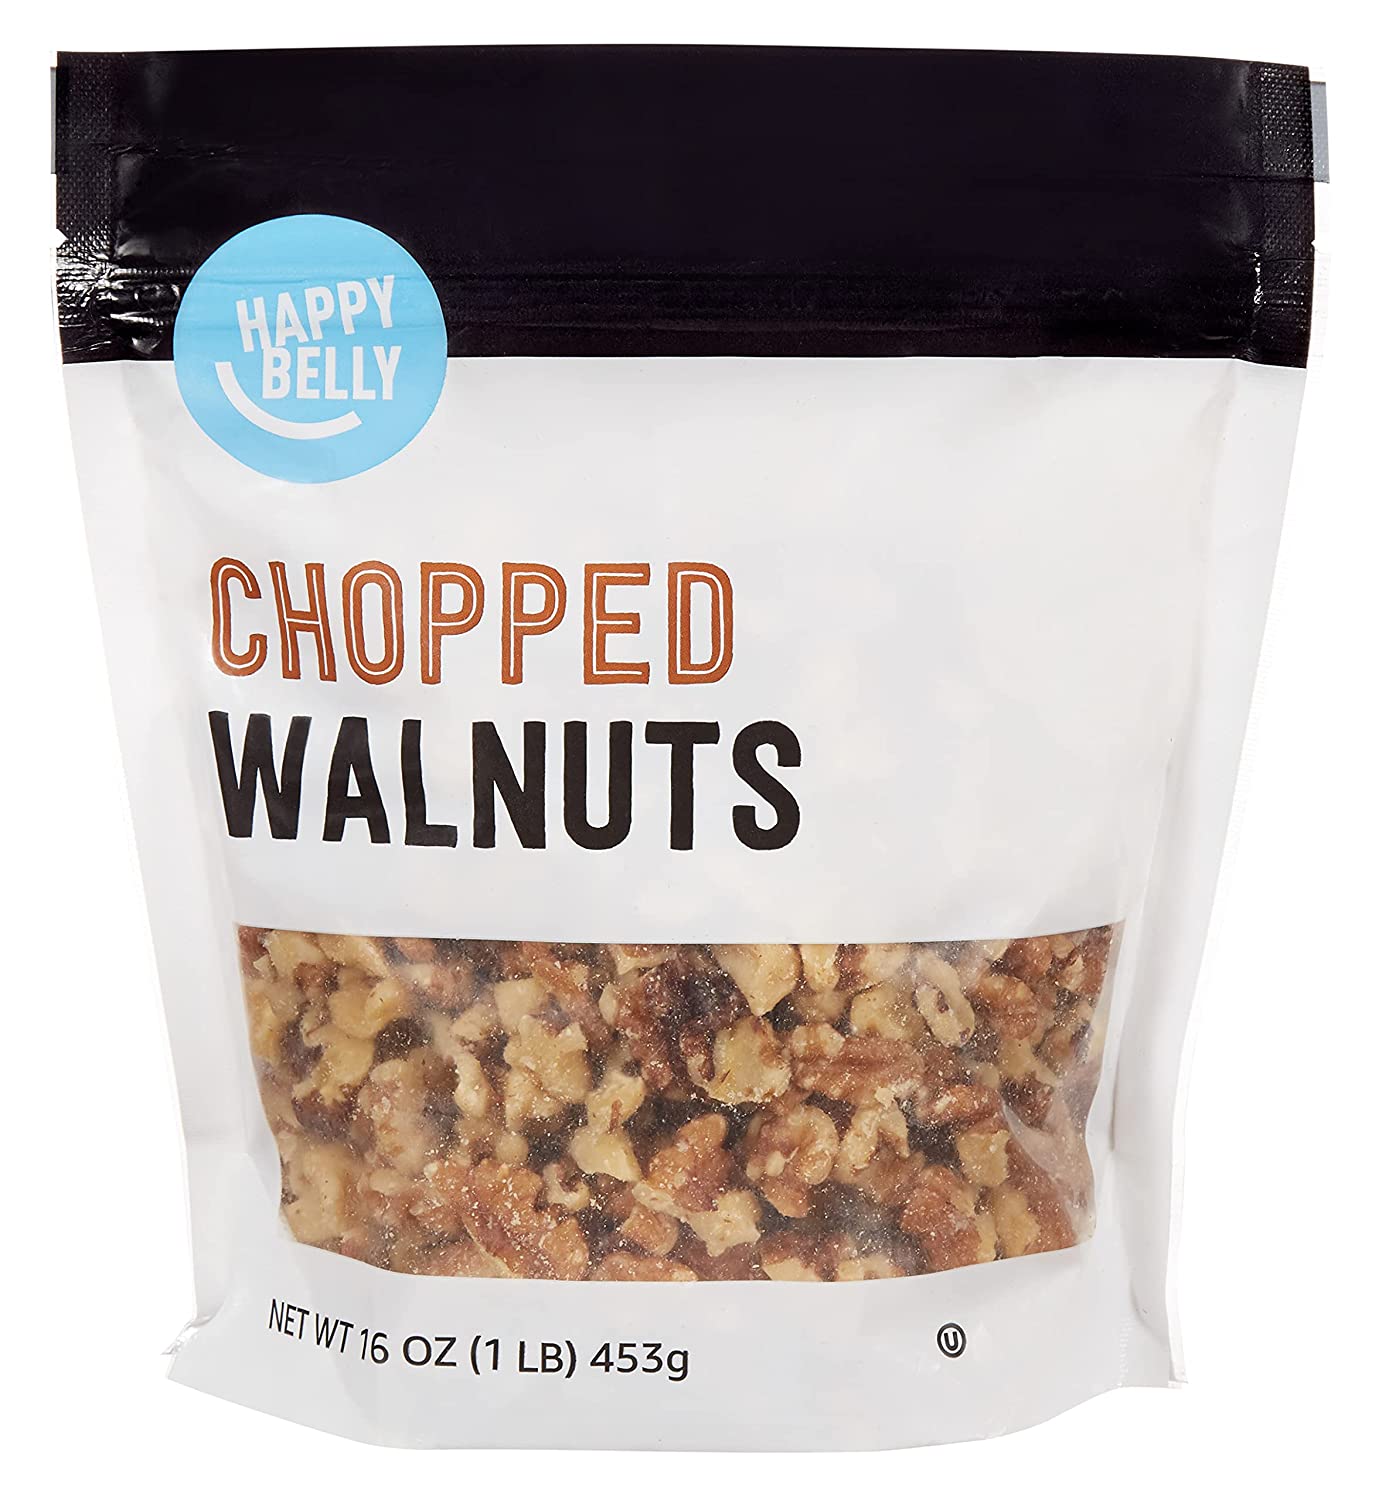 16-Oz Amazon Brand Happy Belly Chopped Walnuts $4.51 + Free Shipping w/ Prime or on orders over $25